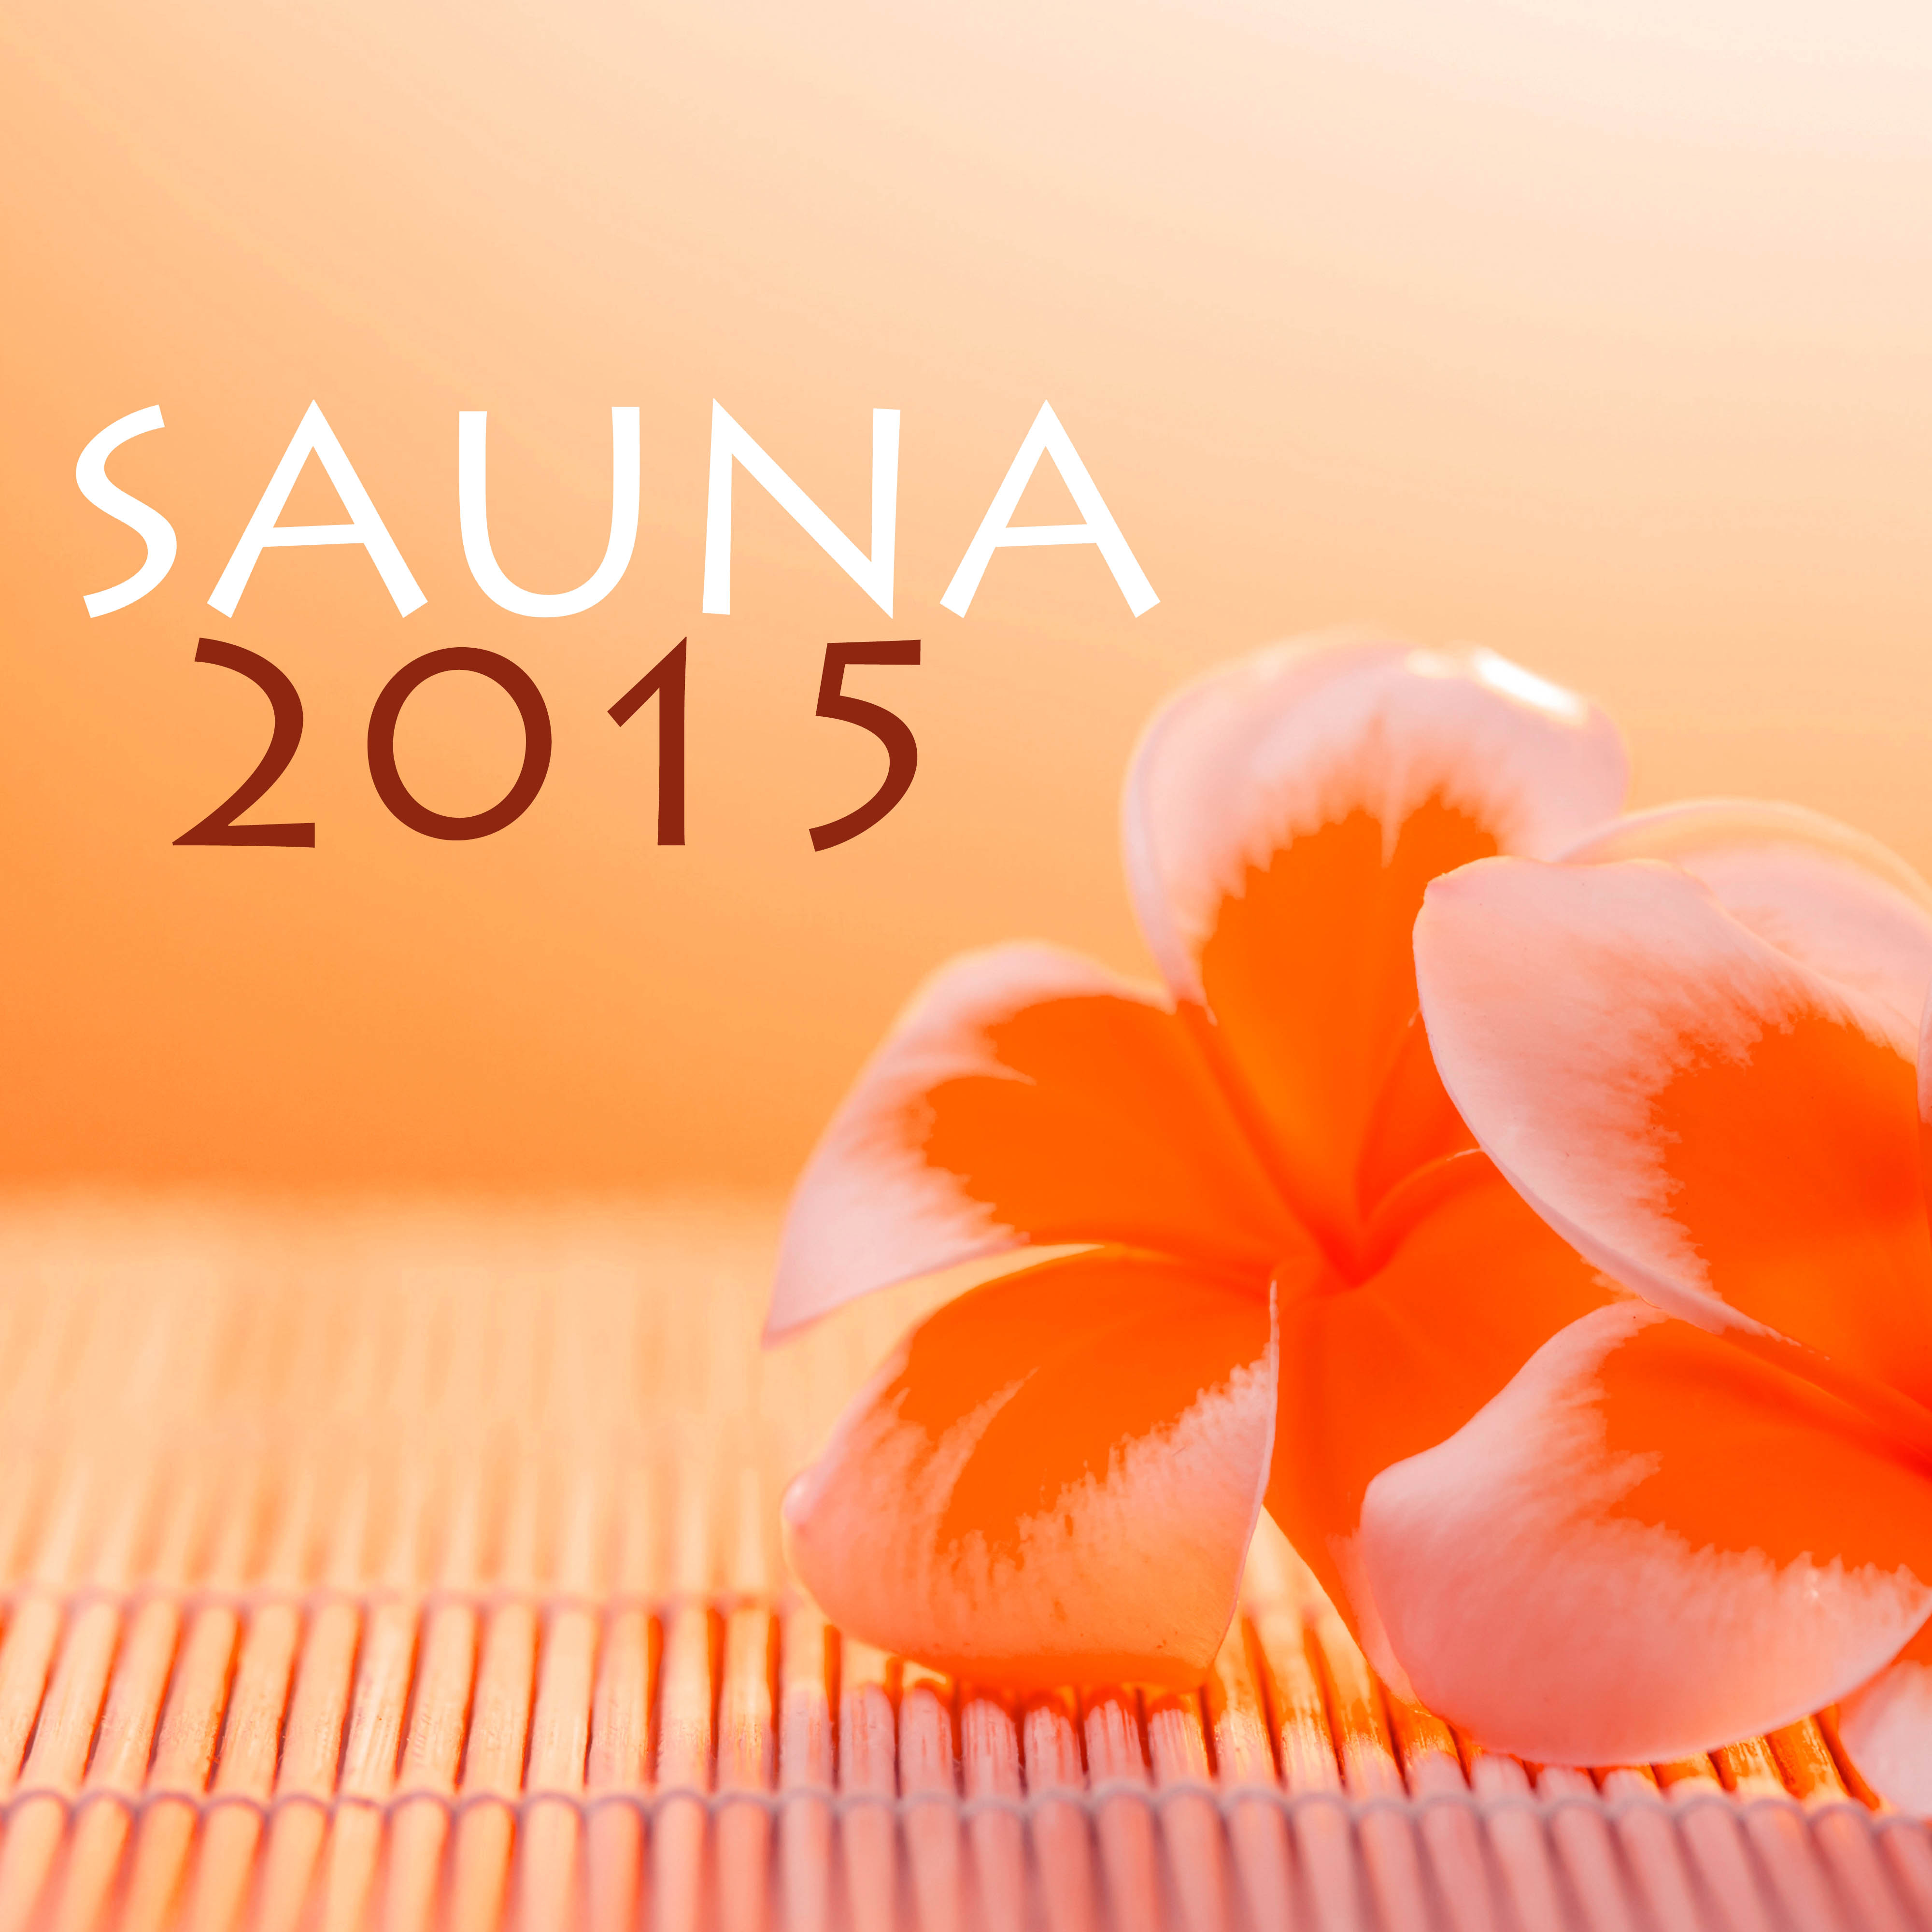 Sauna 2015 - Wellness Center Songs for Spa Relaxation